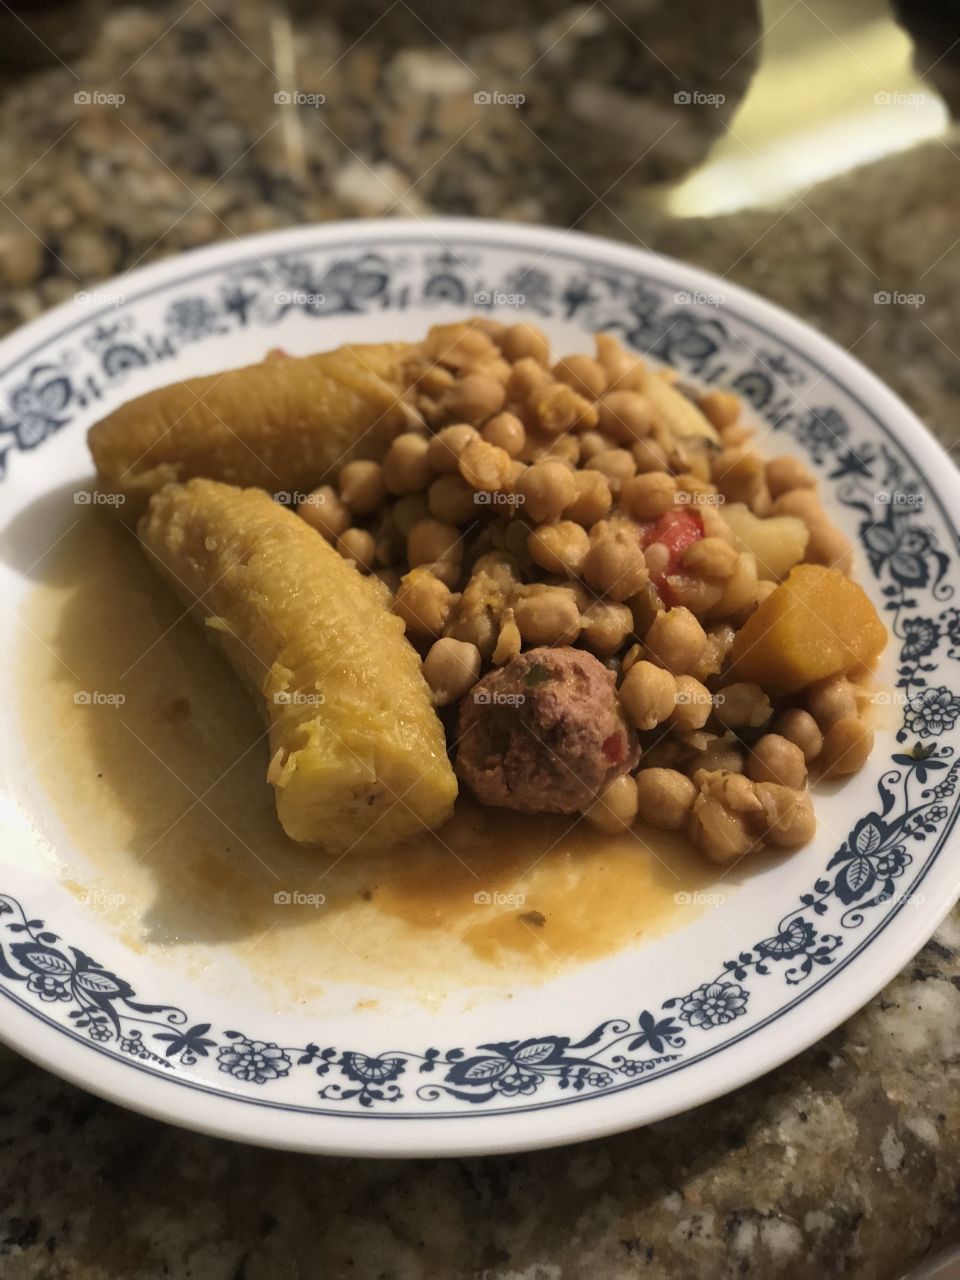 Chickpea and plantains stew. 😋